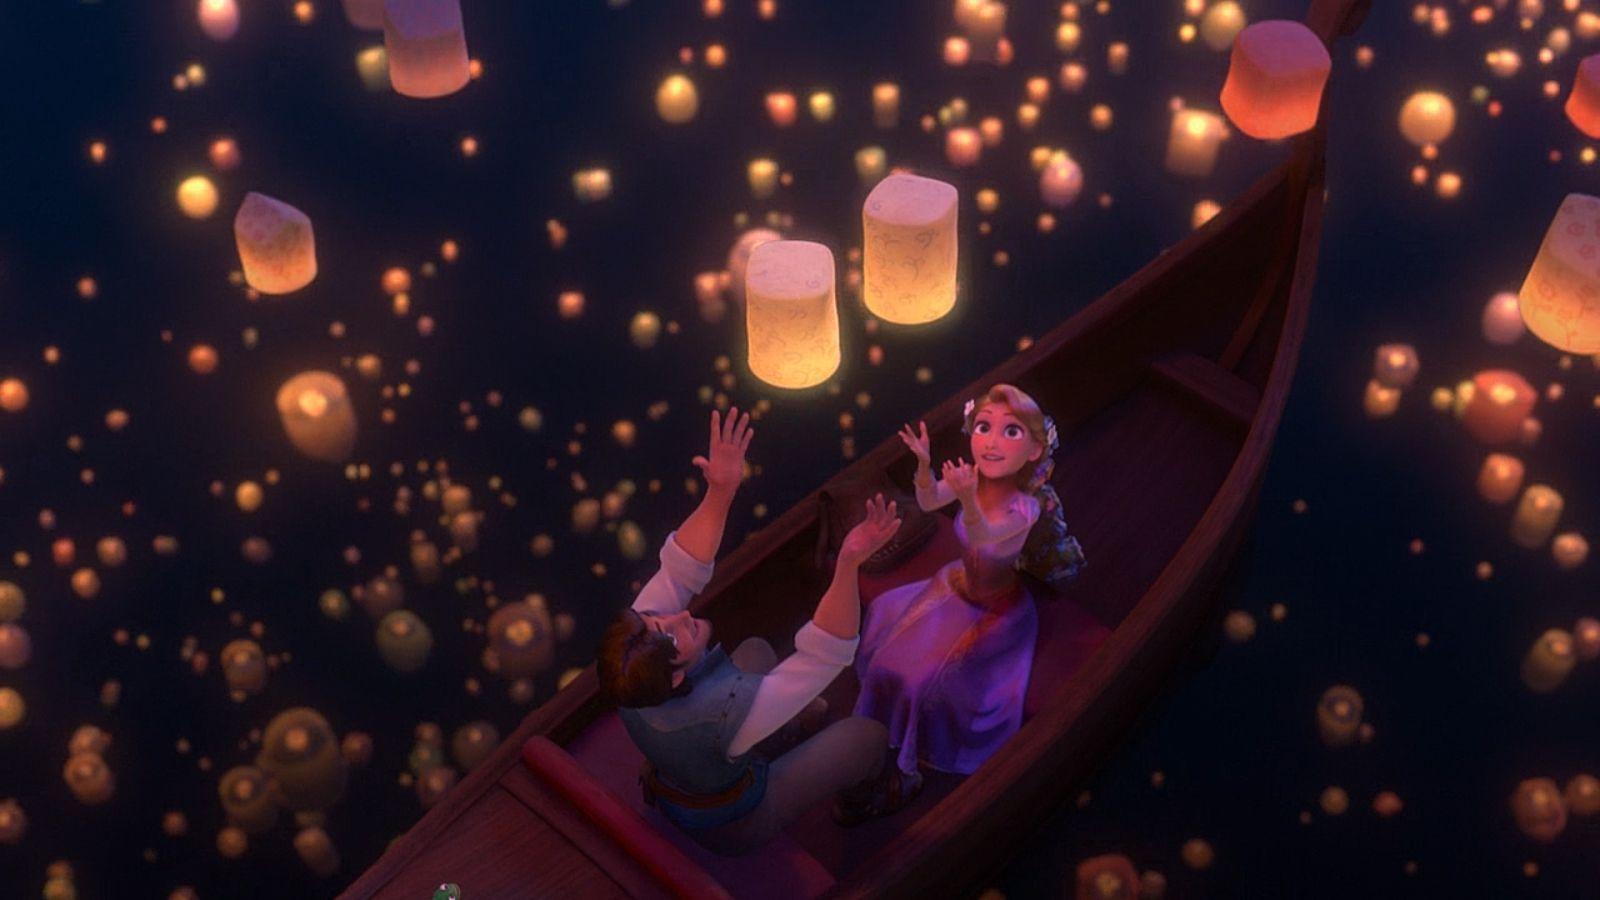 Tangled HD wallpapers Tangled wallpapers of Romance Moment for.